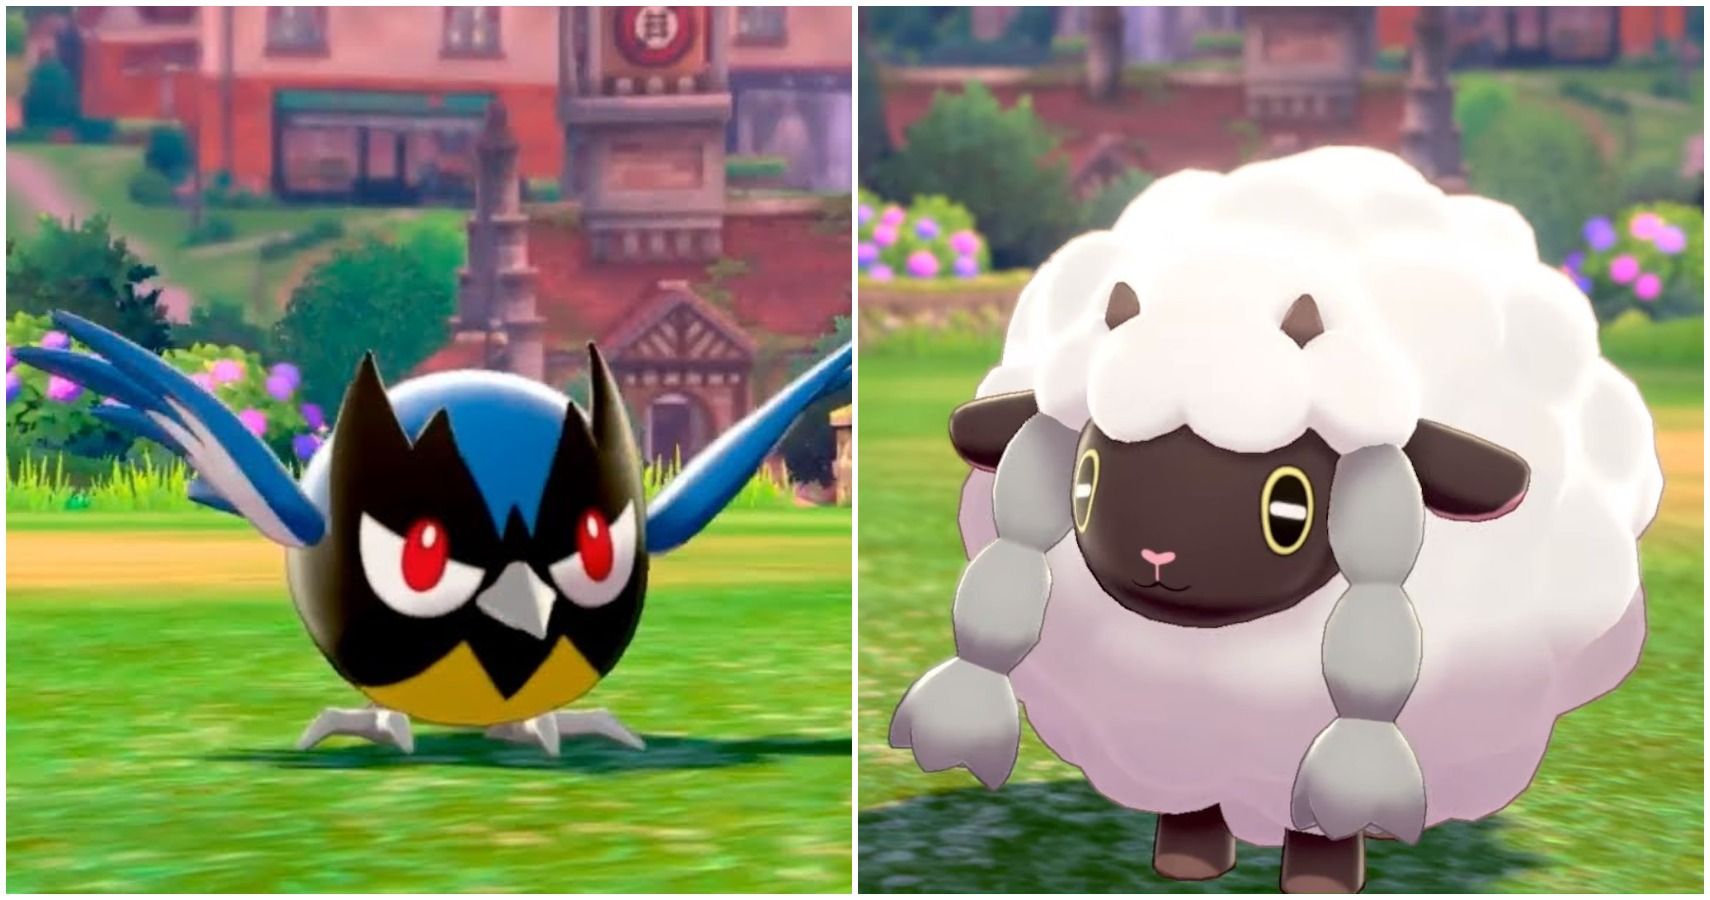 Pokémon Sword and Shield guide: Which is the best starter? - Polygon